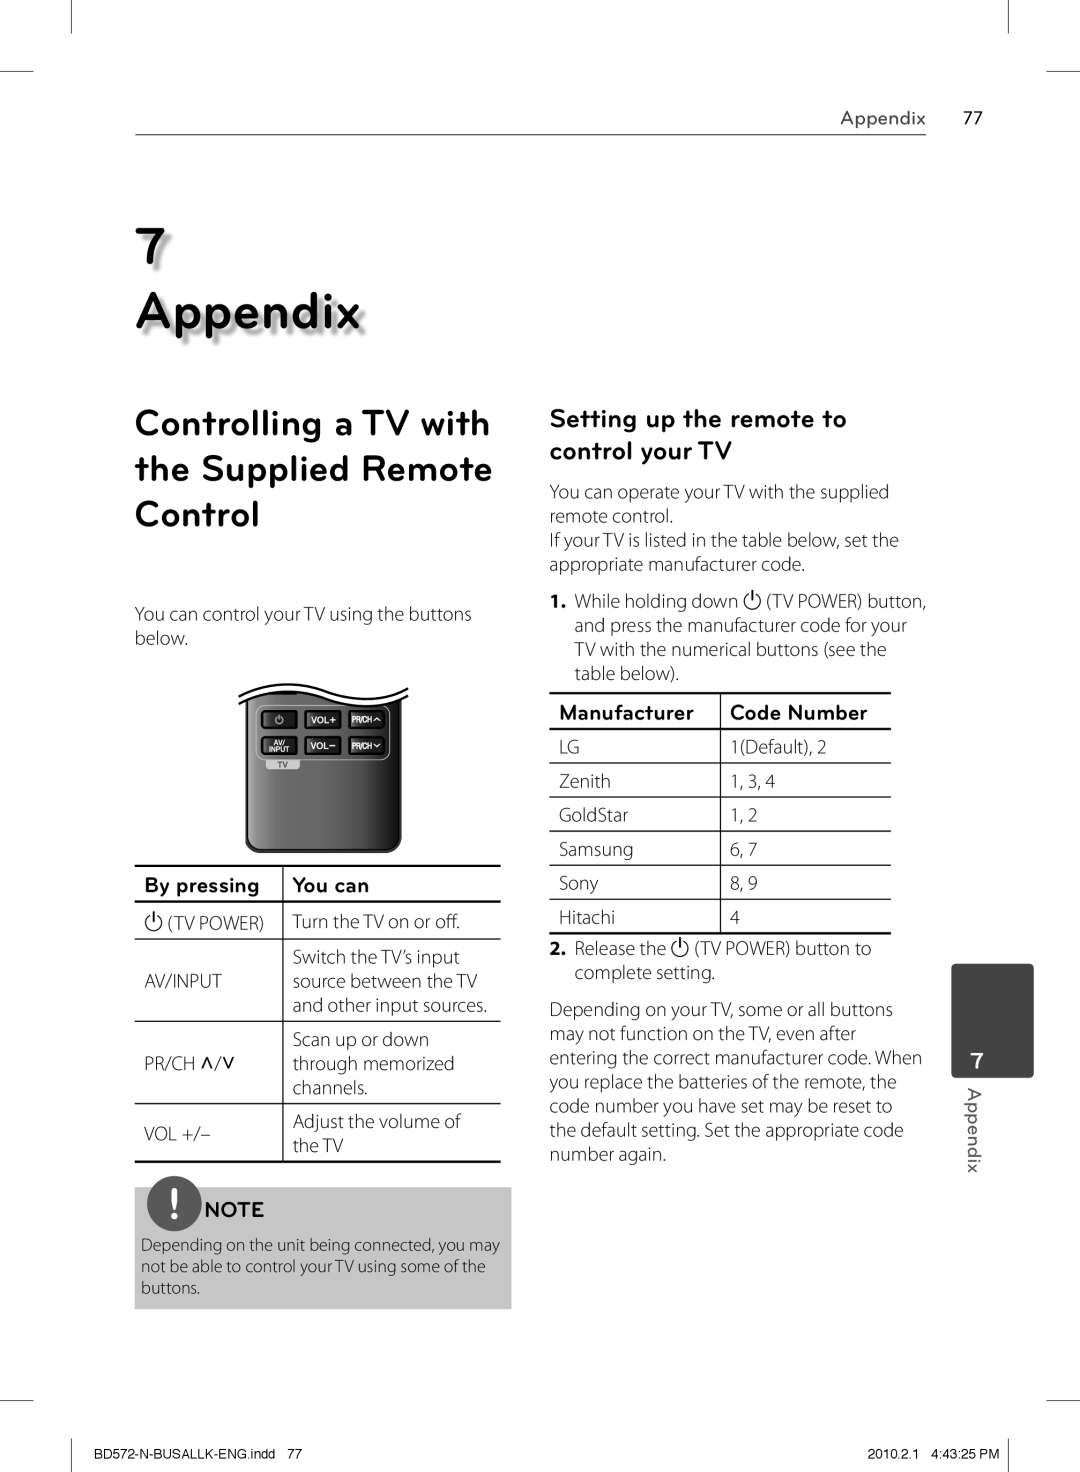 LG Electronics BD570 Appendix, Controlling a TV with the Supplied Remote Control, Setting up the remote to control your TV 